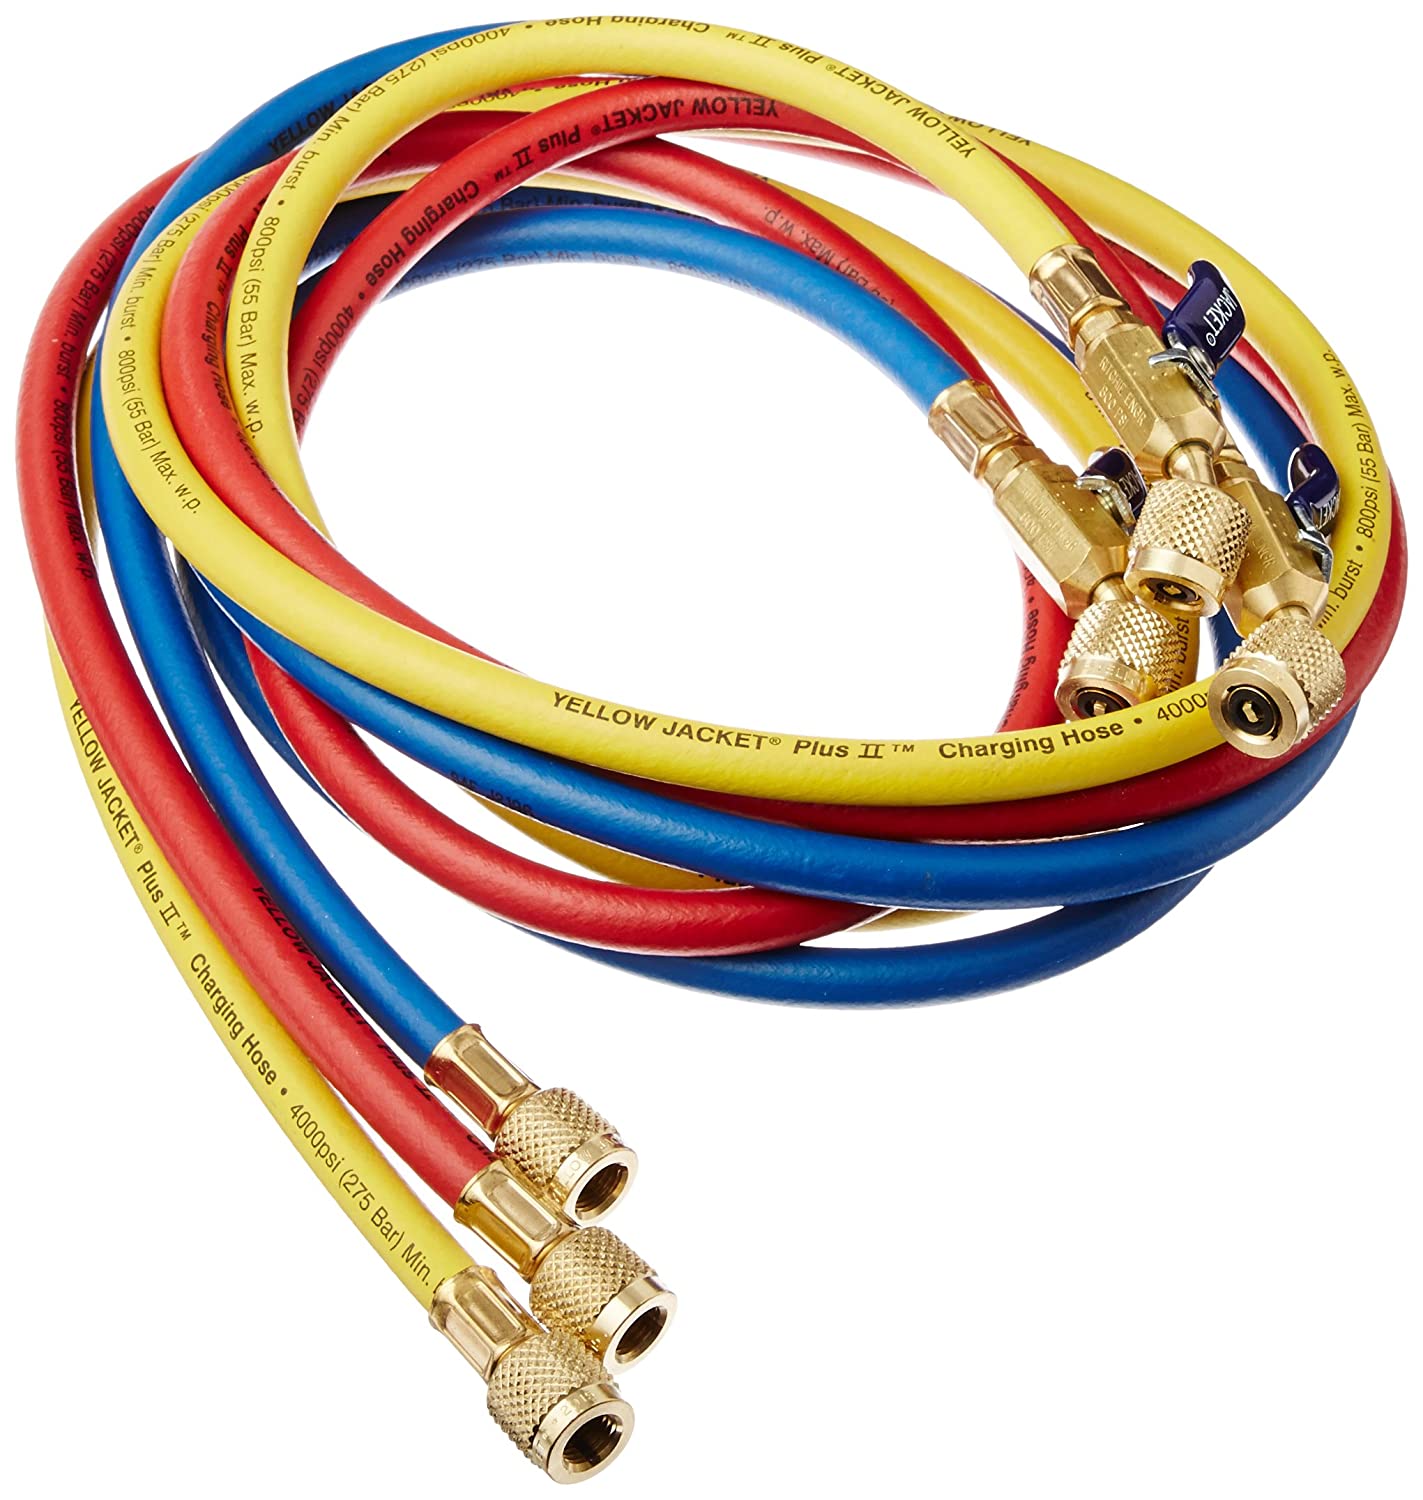 Yellow Jacket 29986 Plus II 1/4" Hose with Compact Ball Valve | 72" | Pack of 3